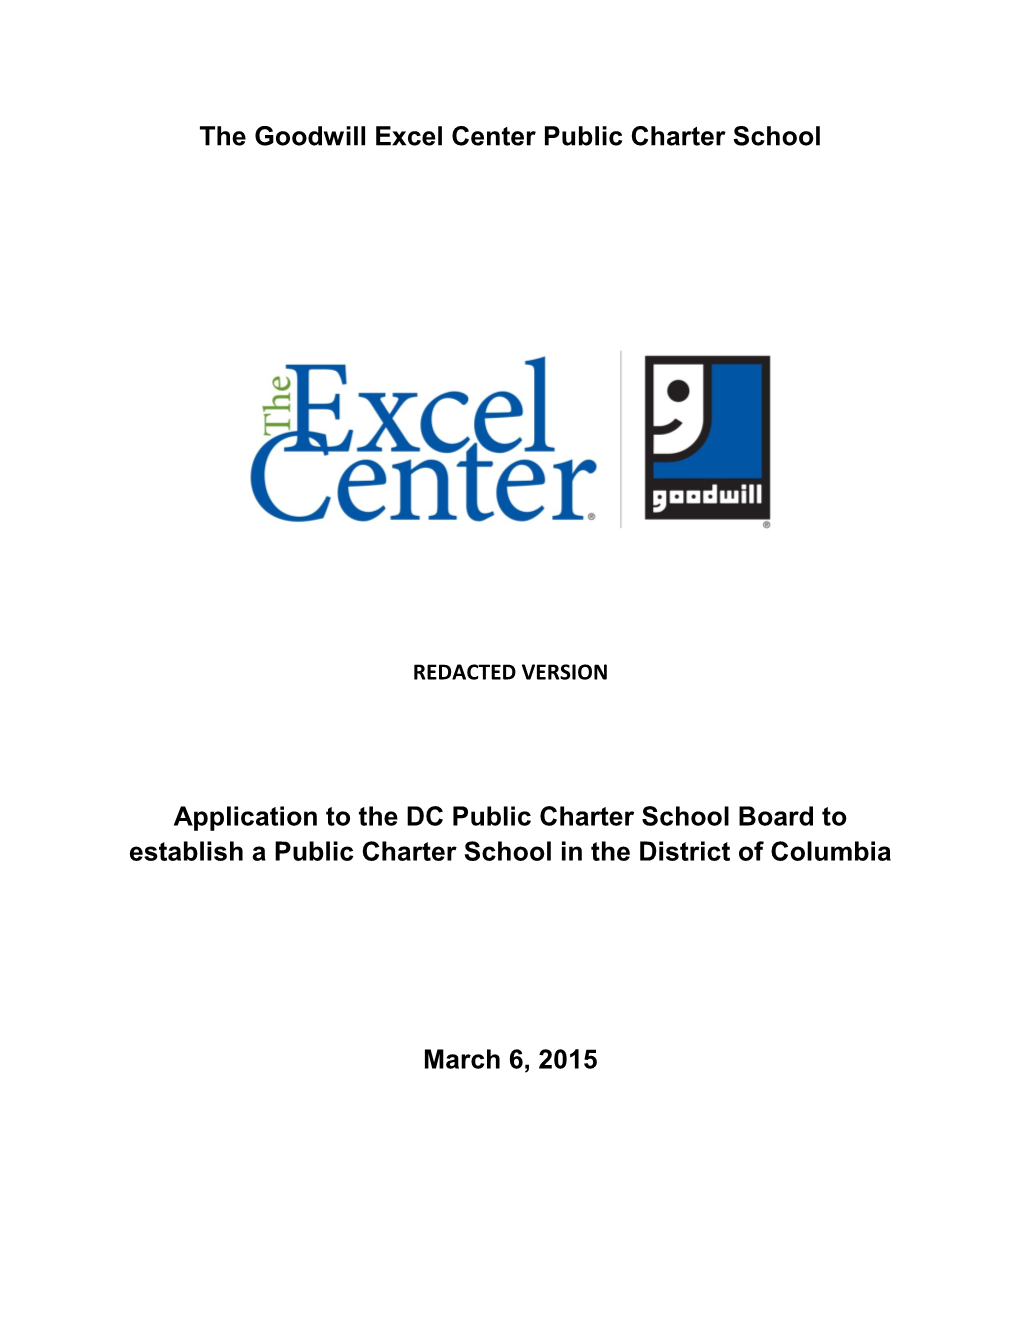 The Goodwill Excel Center Public Charter School